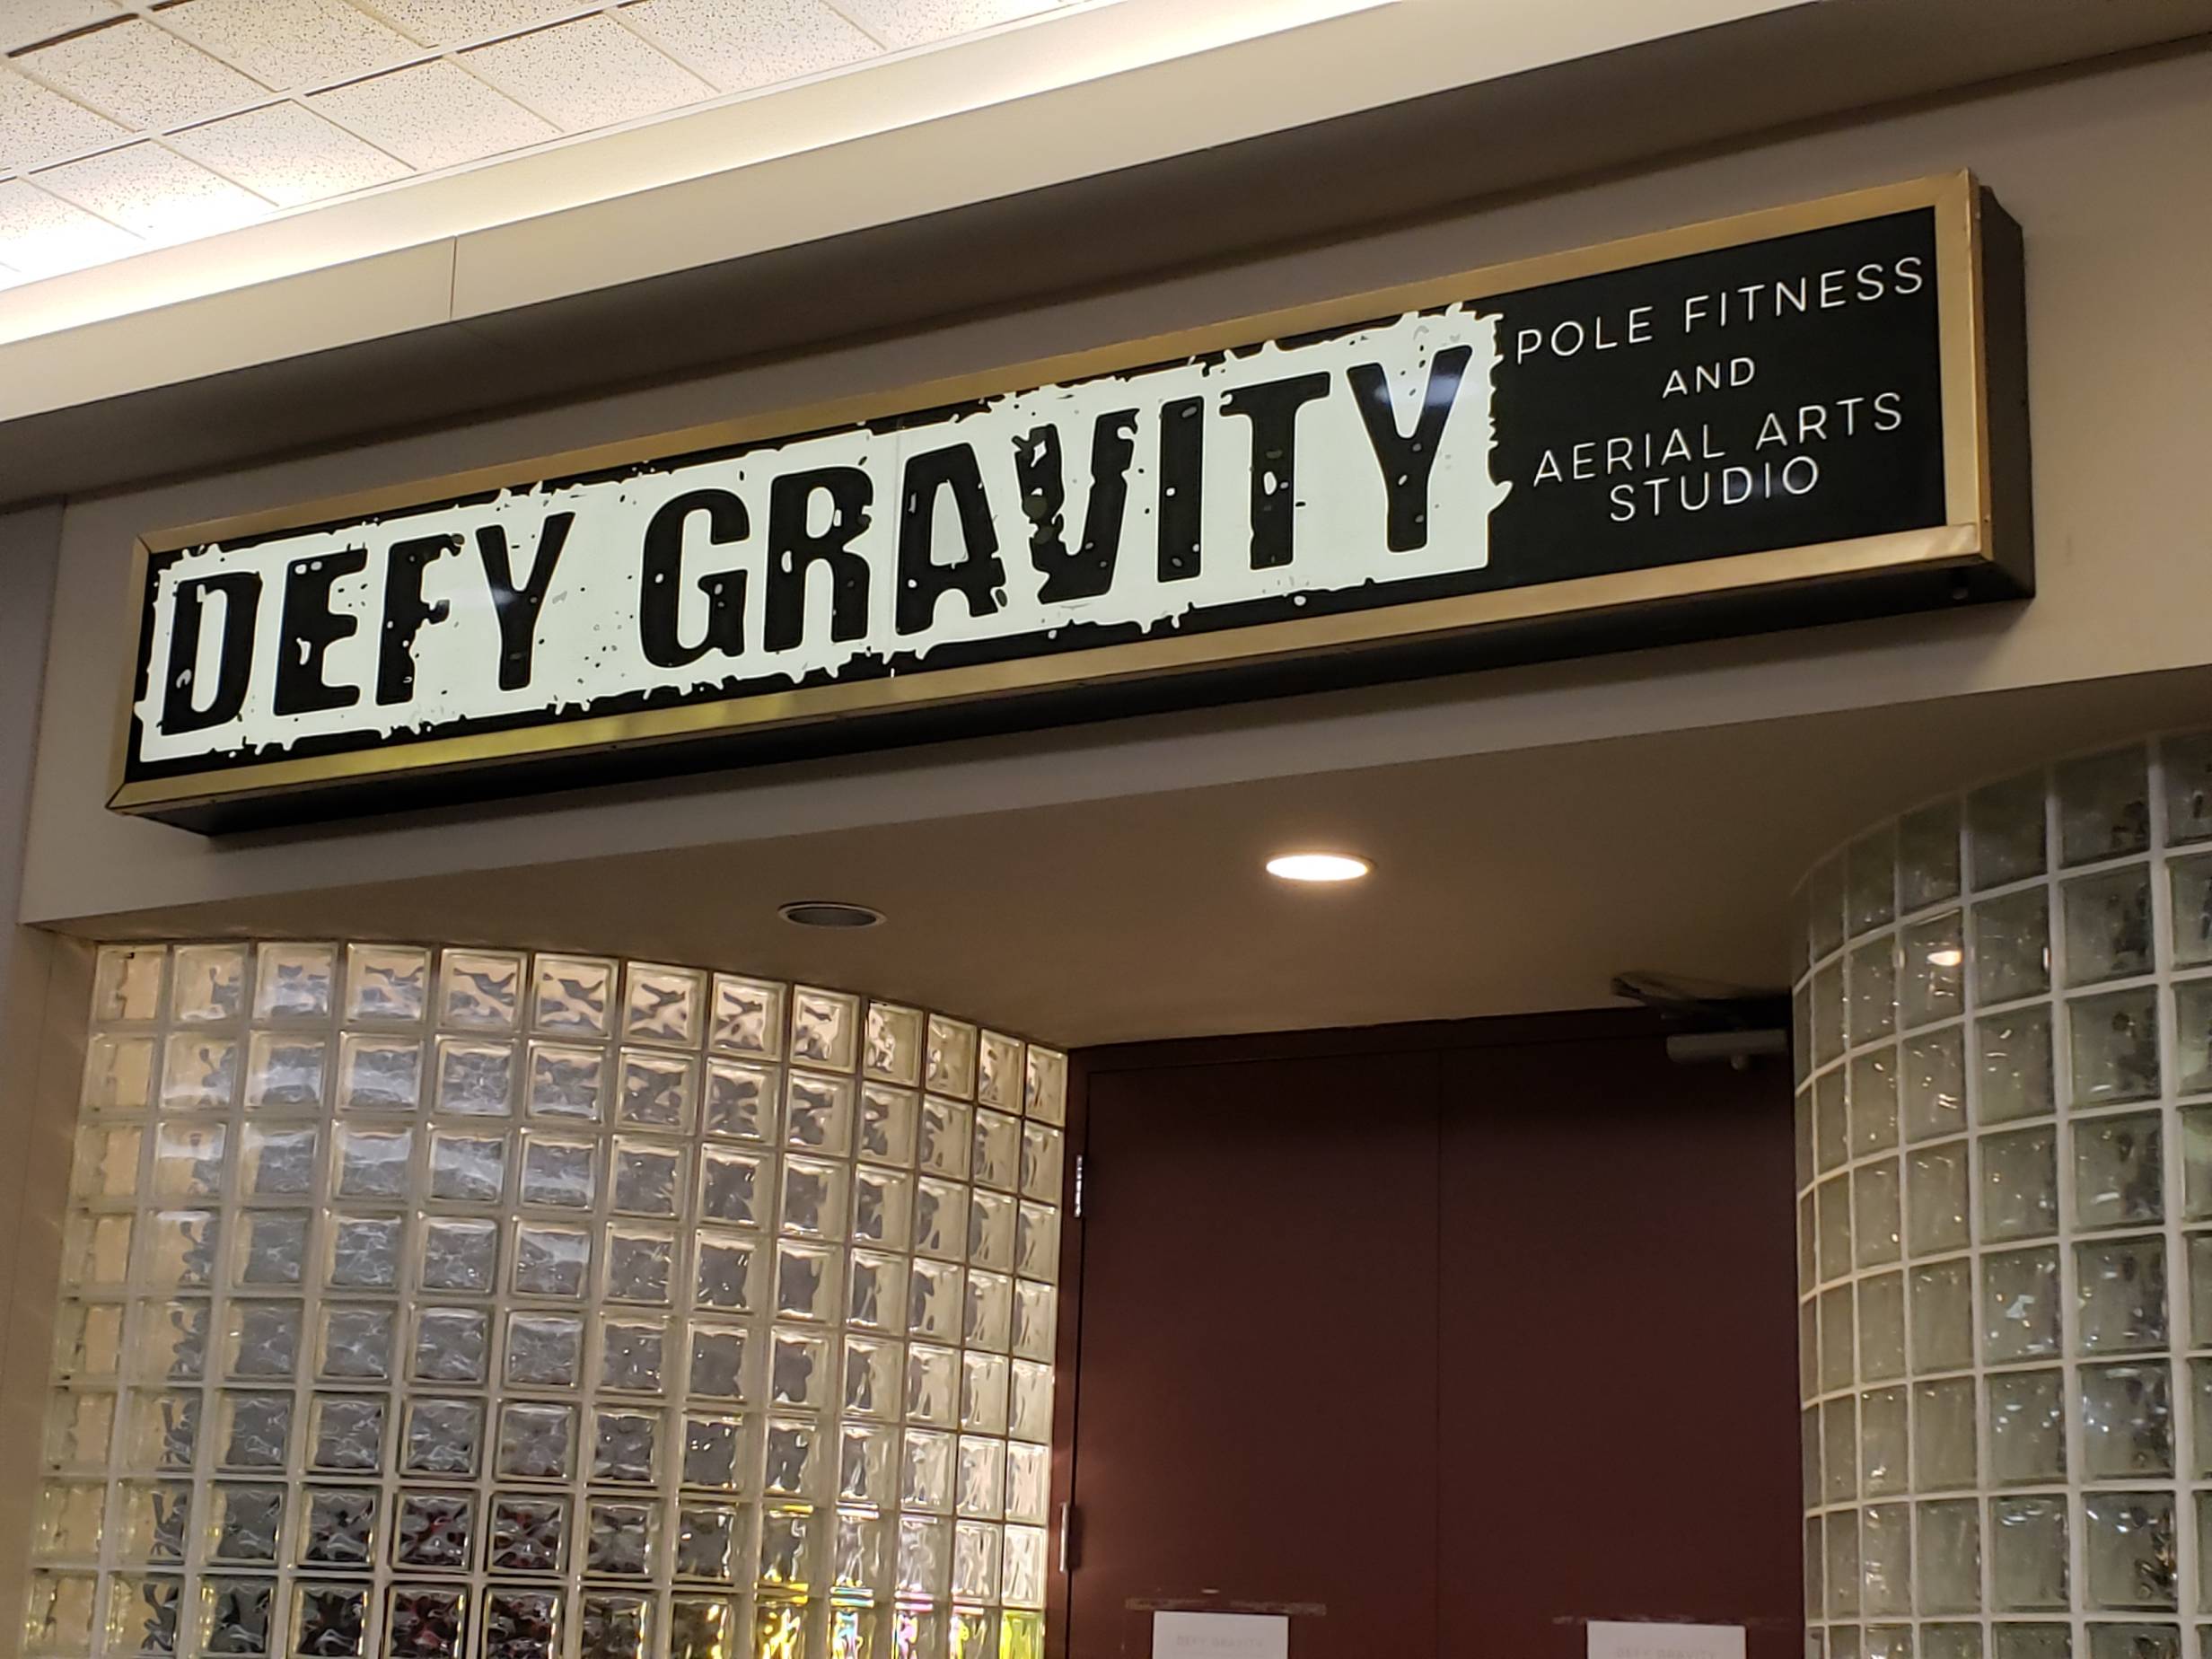 How long is Defy Gravity?